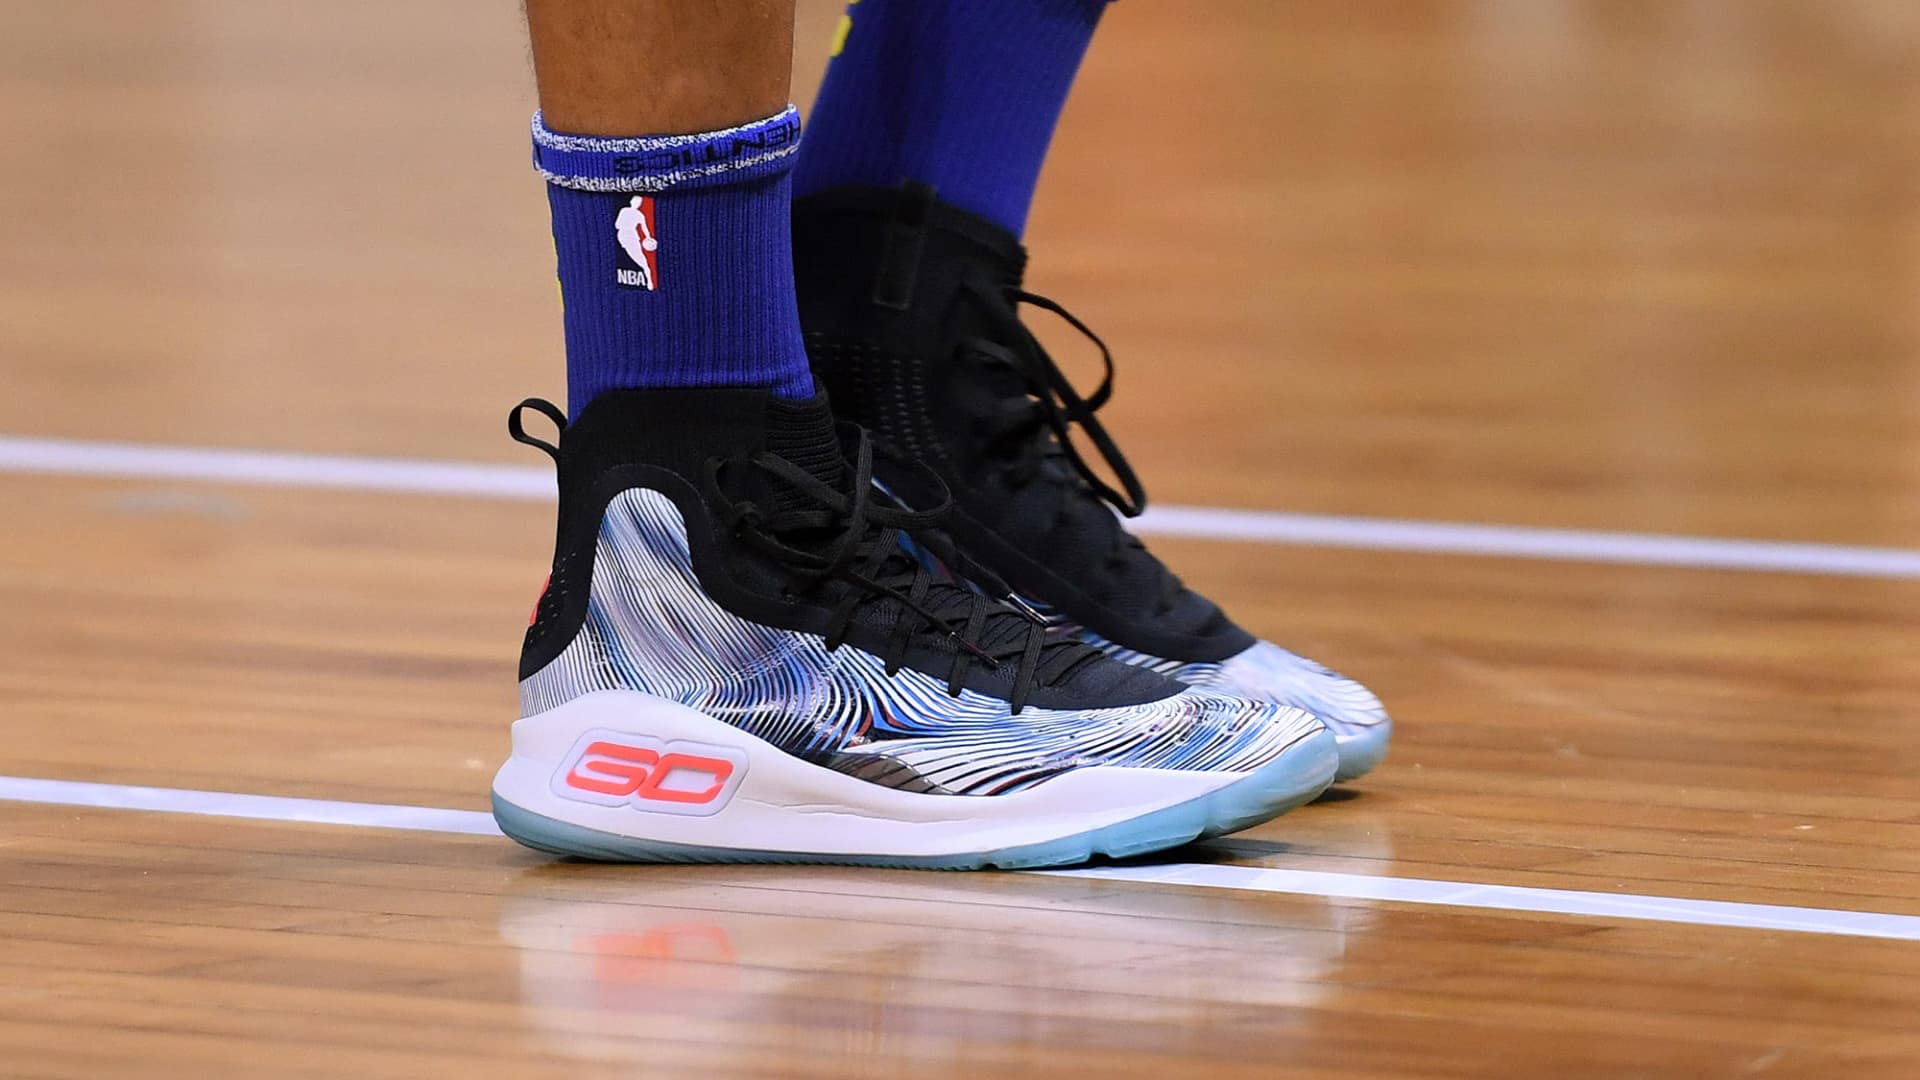 Stephen Curry’s new shoe will spark an Under Armour turnaround: Analyst